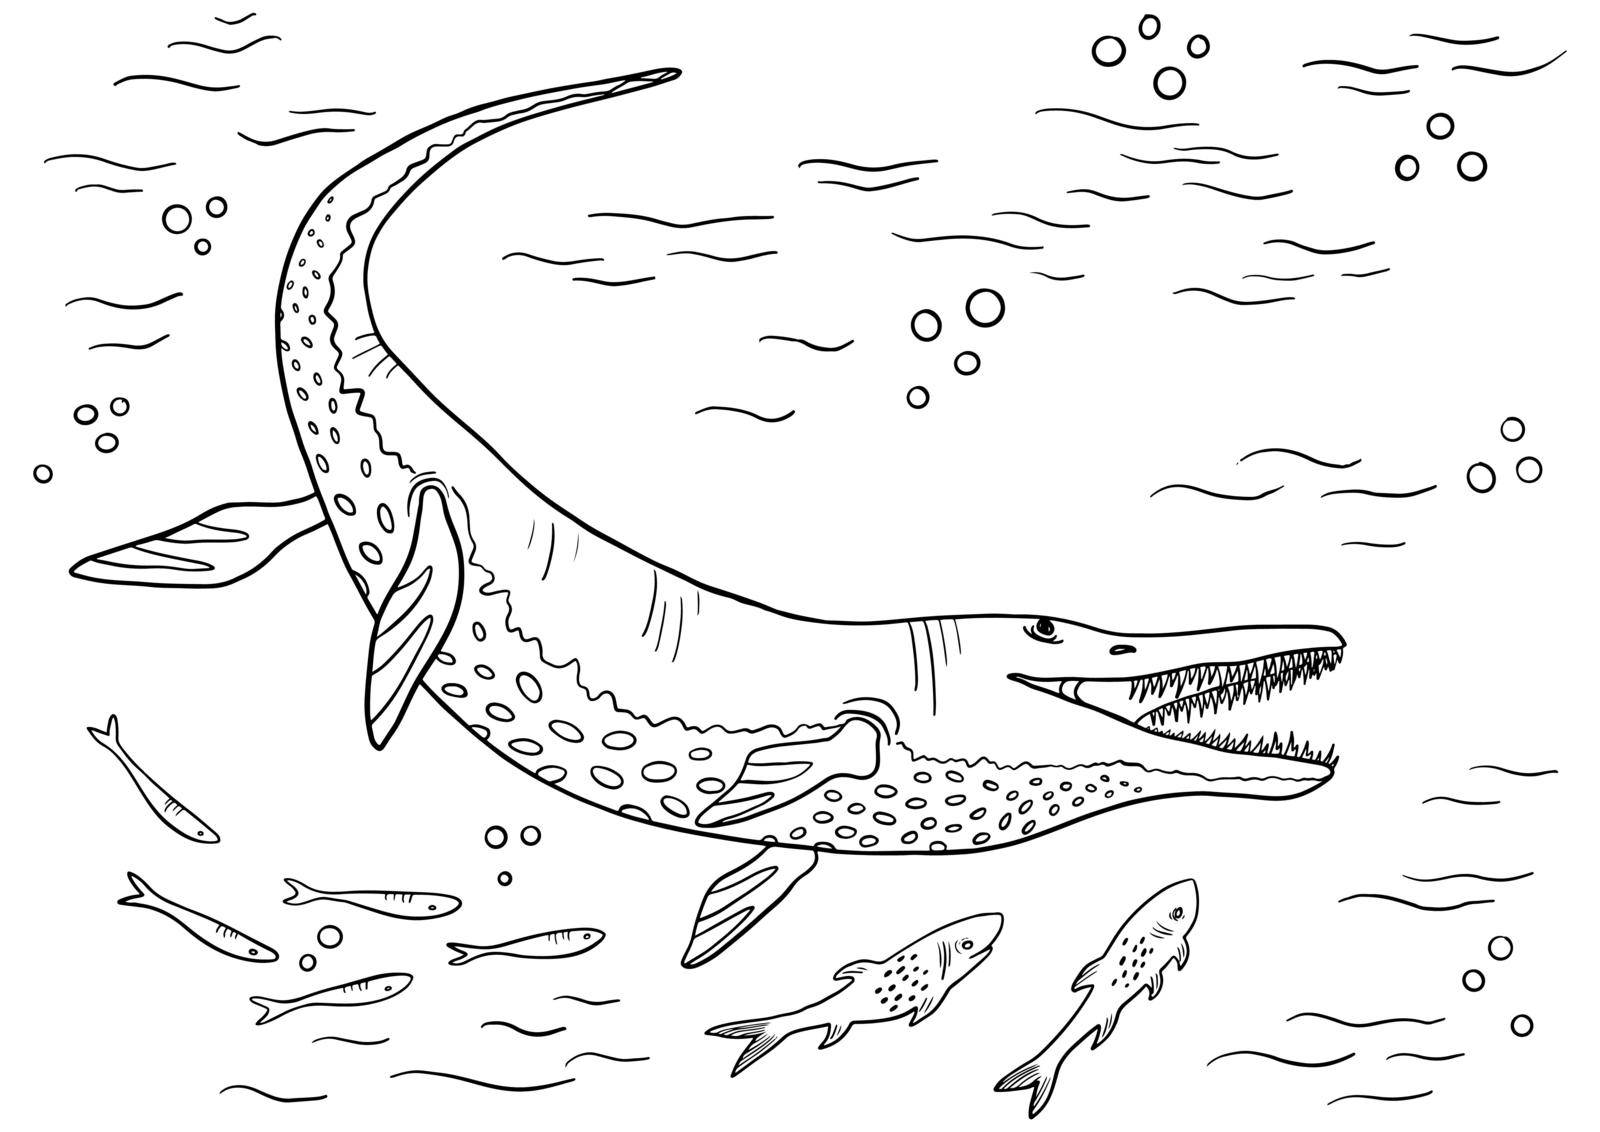 Dinosaur Coloring Page for Education and Fun. Black and White Prehistoric Illustration. by iliris